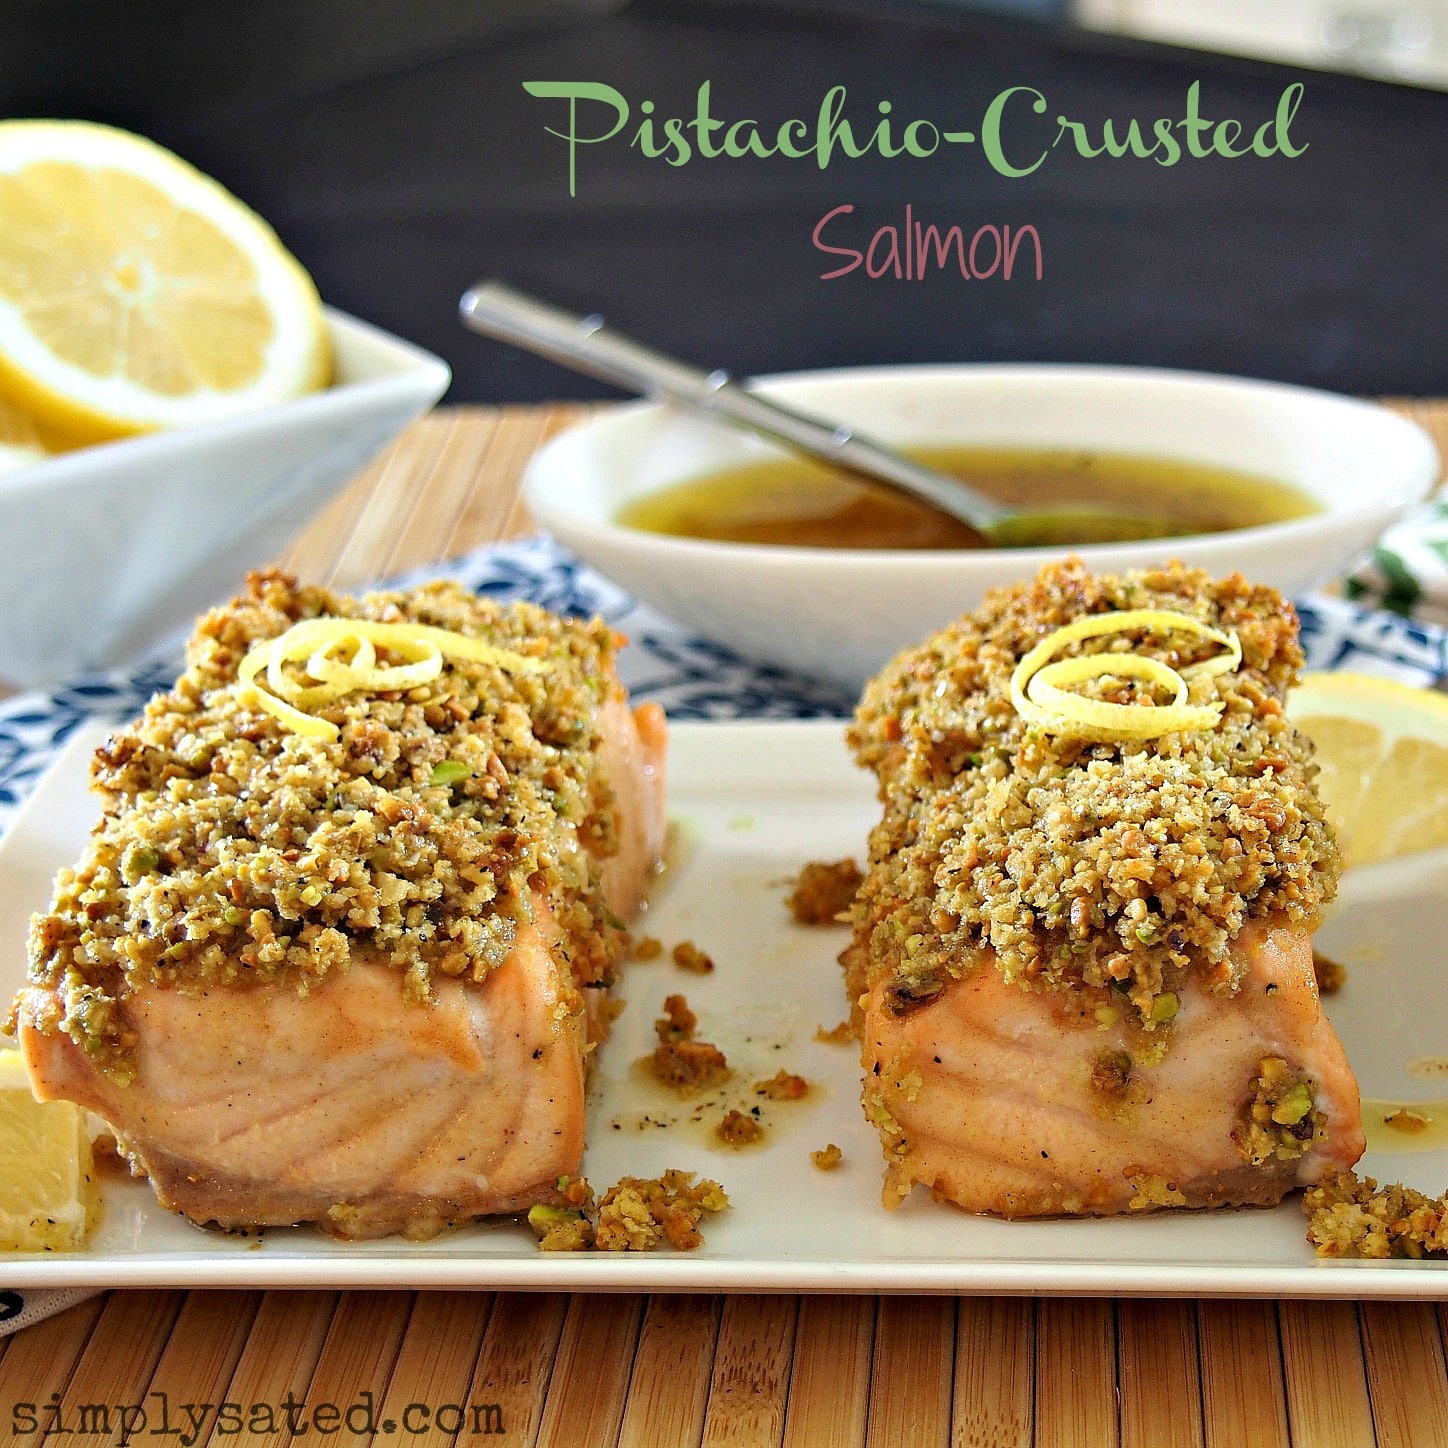 Salmon topped with a honey, lemon glaze then topped with a mixture of pistachios & panko crumbs.  So delicious and satisfying.